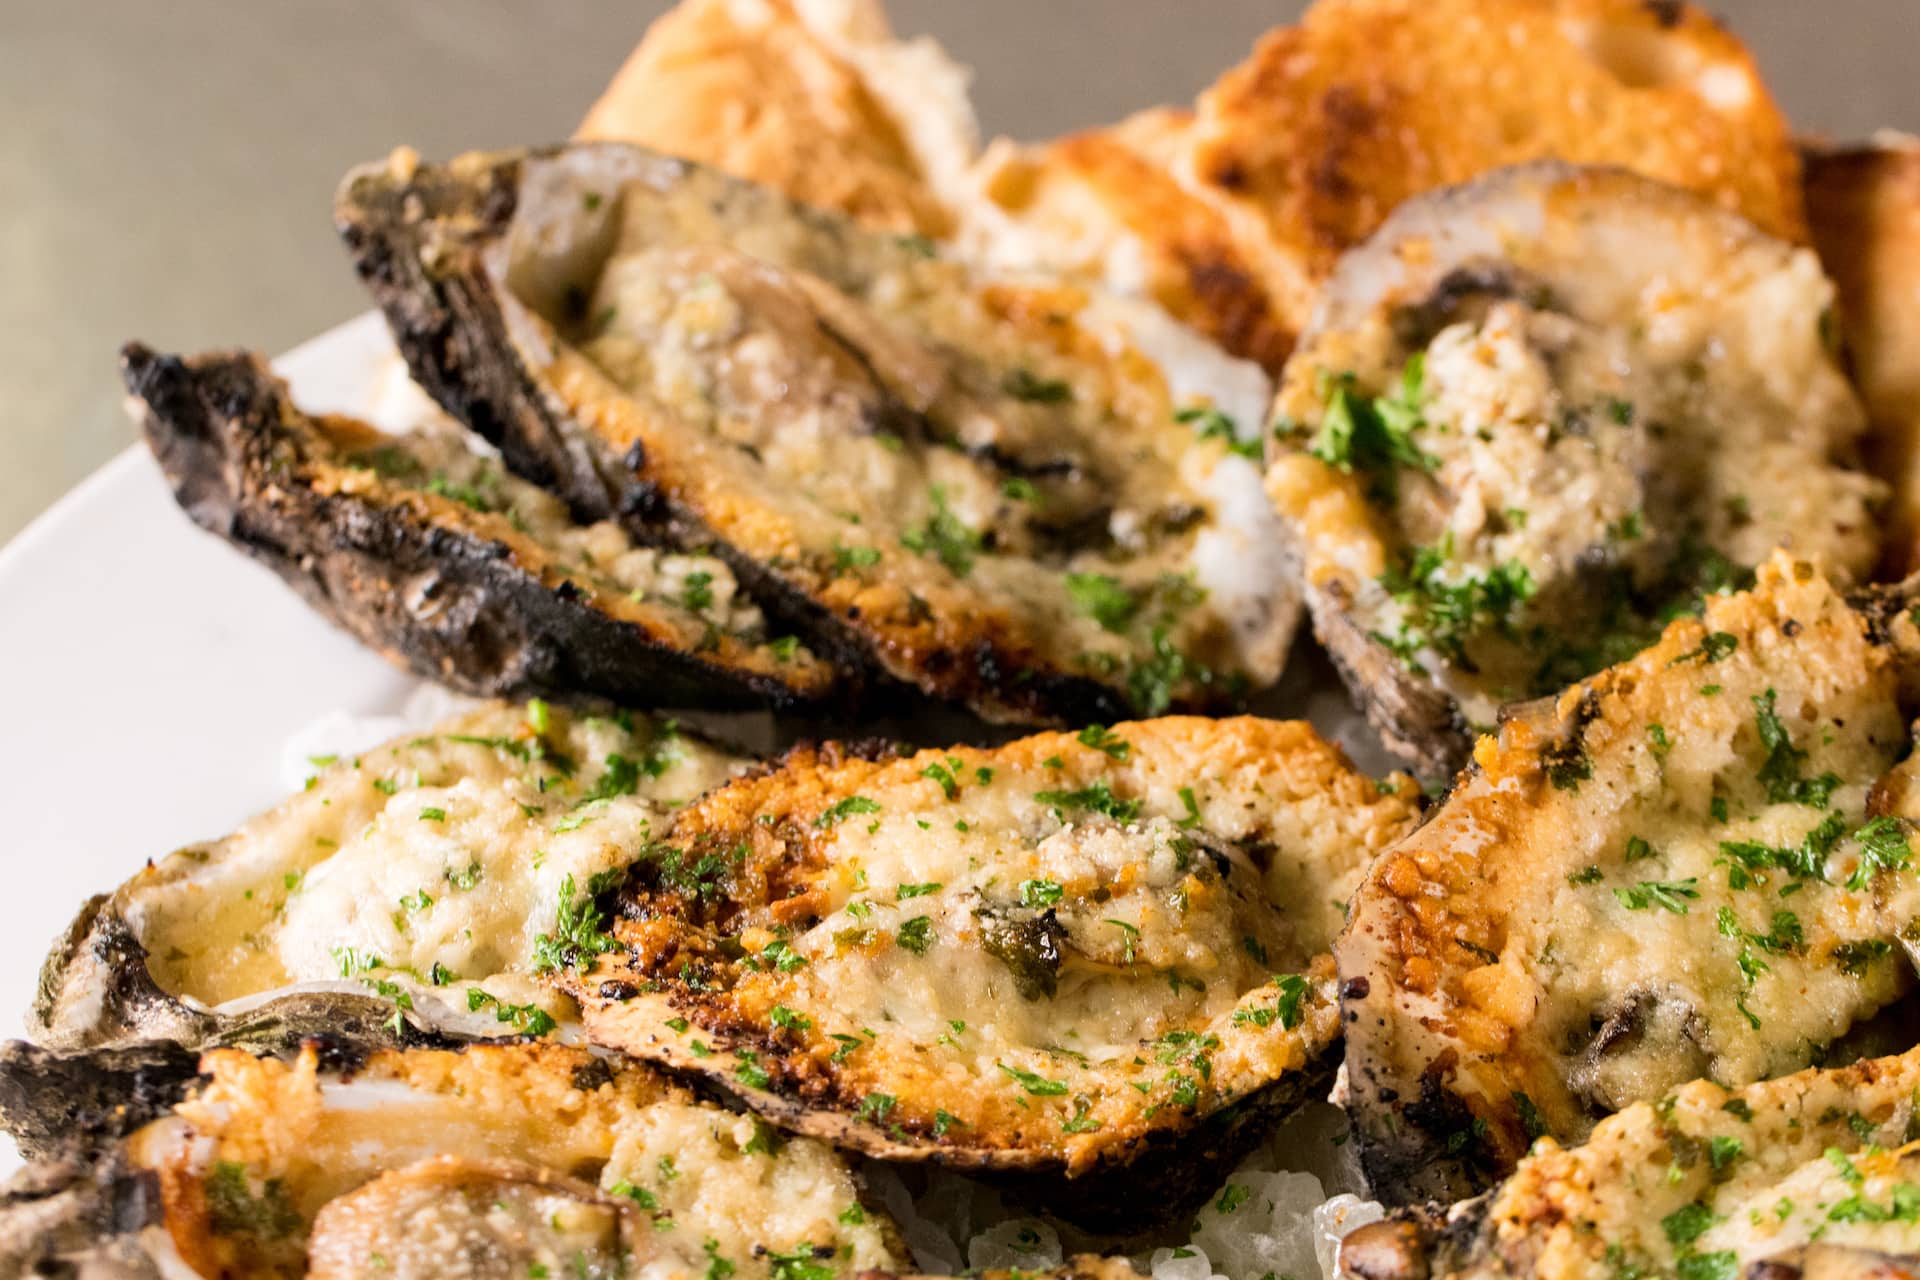 🦞 Say “Yum” Or “Yuck” to These Seafood Dishes and We’ll Reveal How Picky You Are Baked Oysters